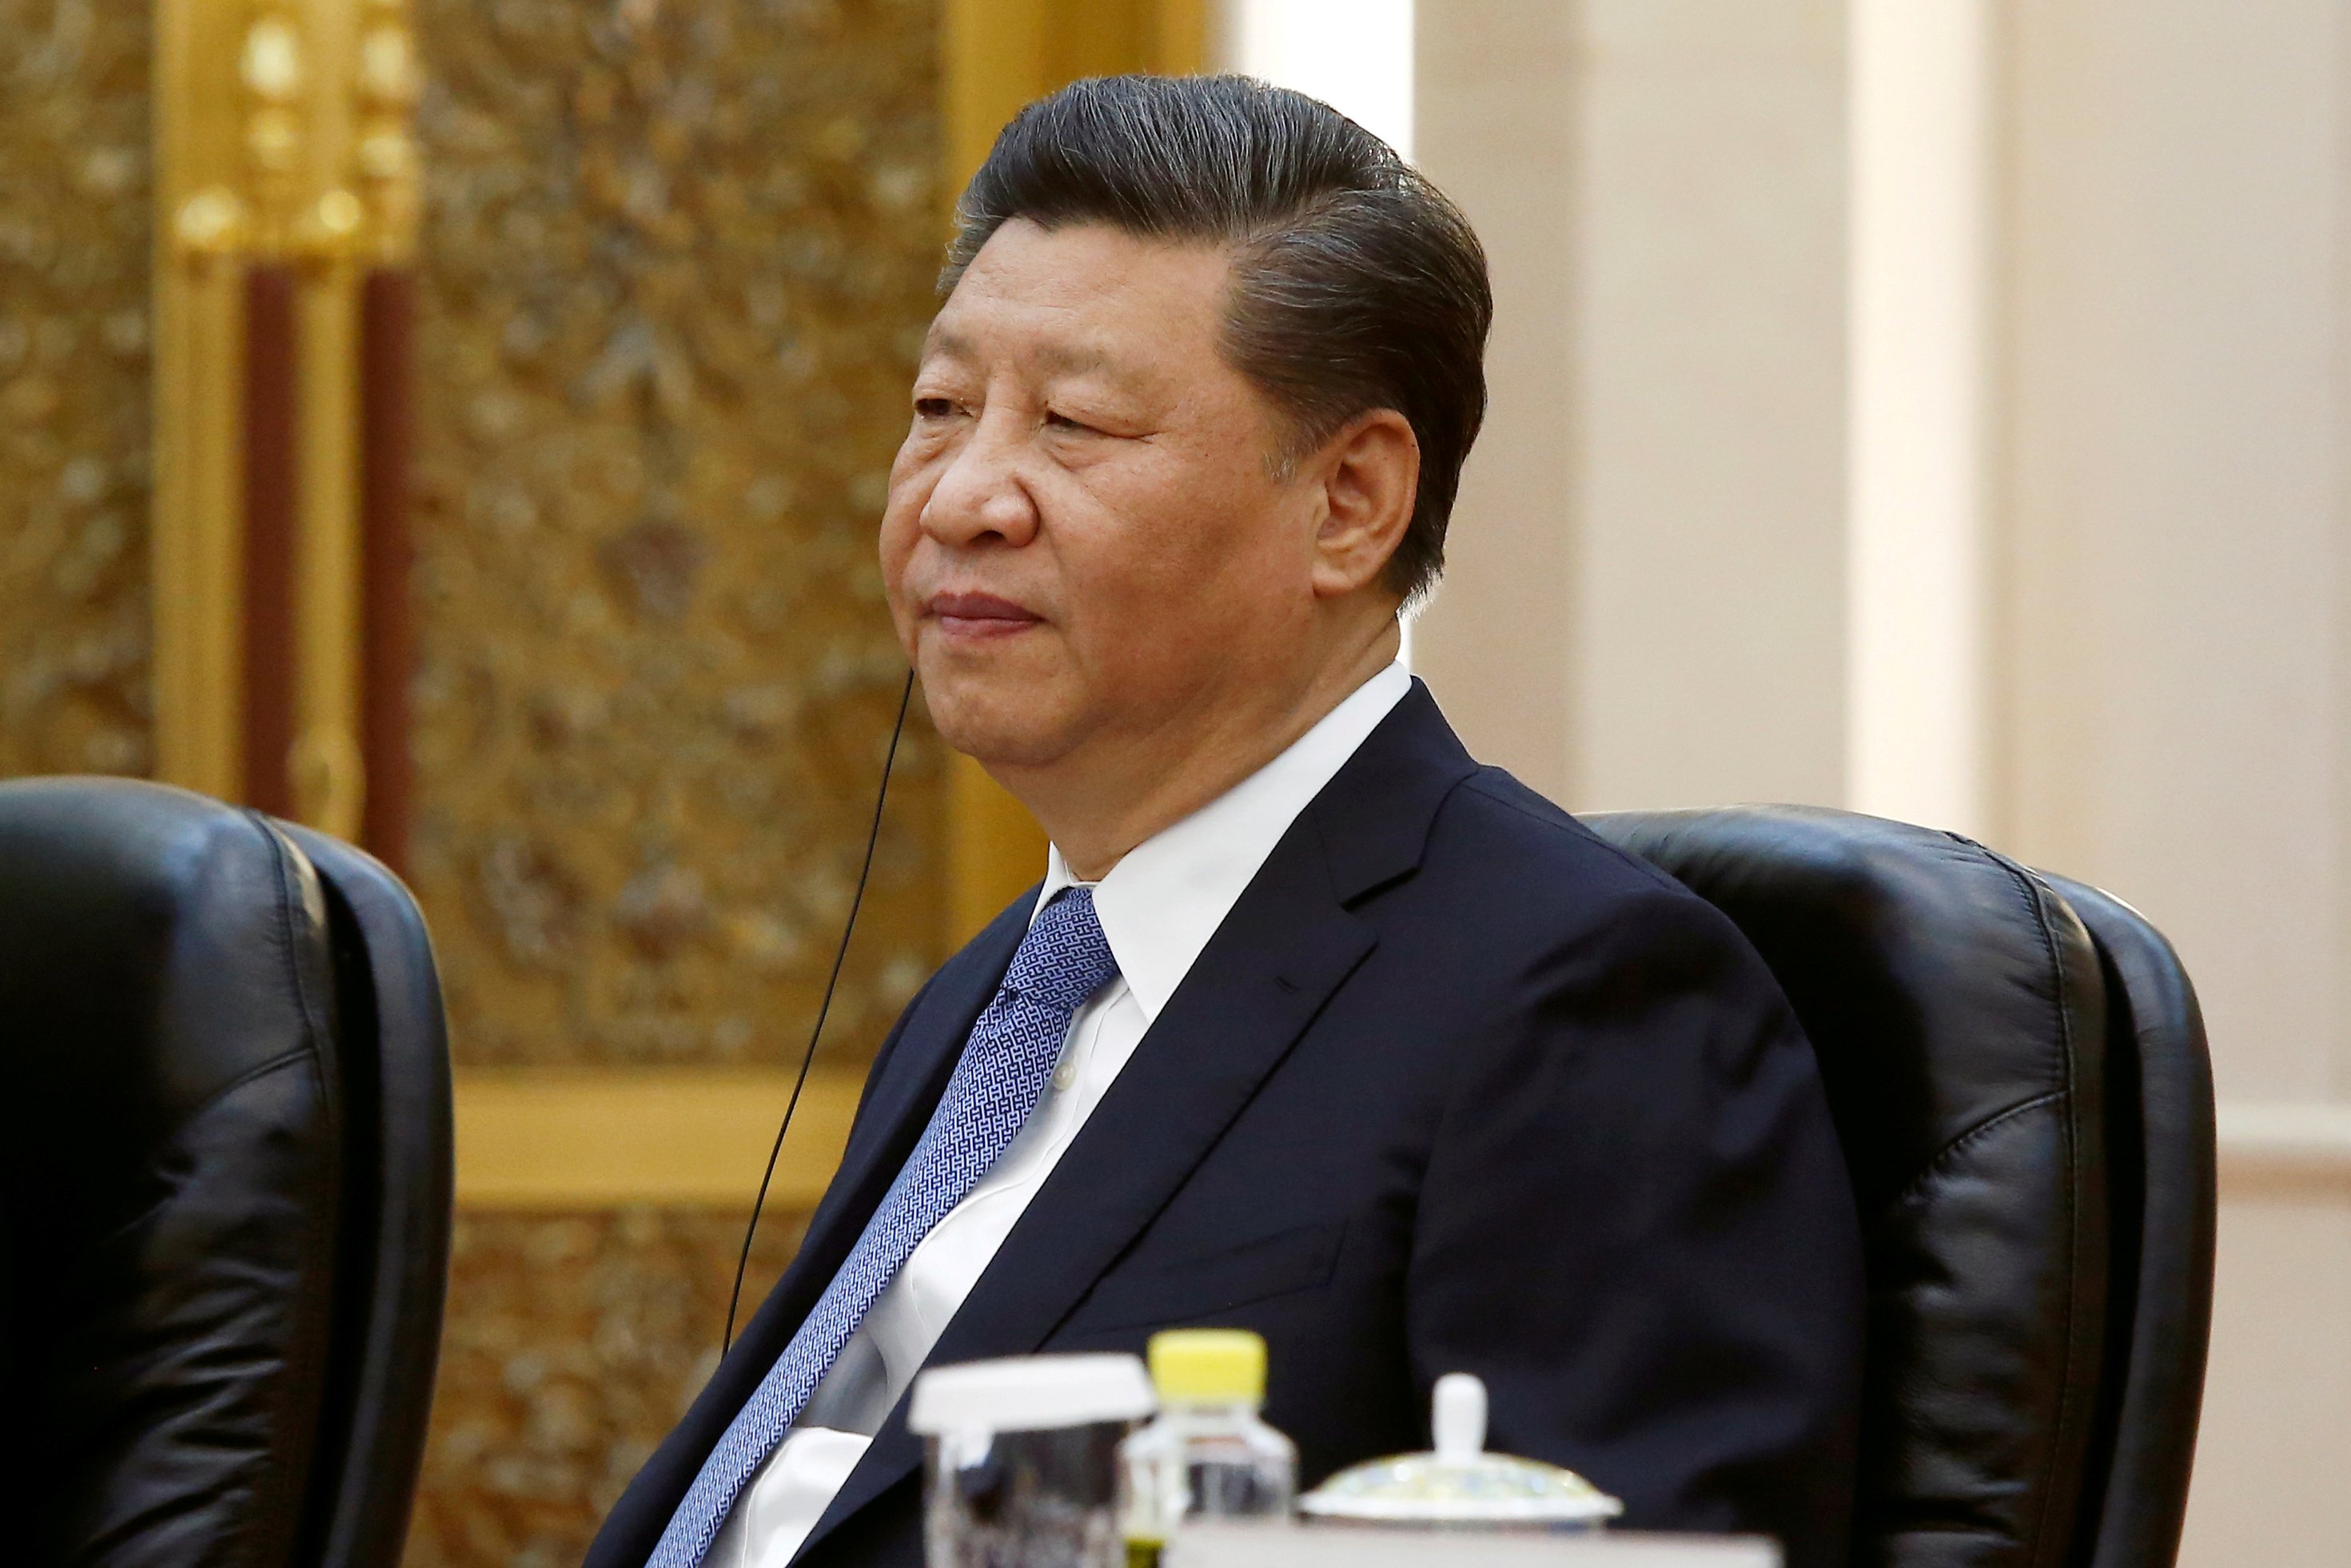 Chinese President Xi Jinping attends a meeting at the Great Hall of the People in Beijing